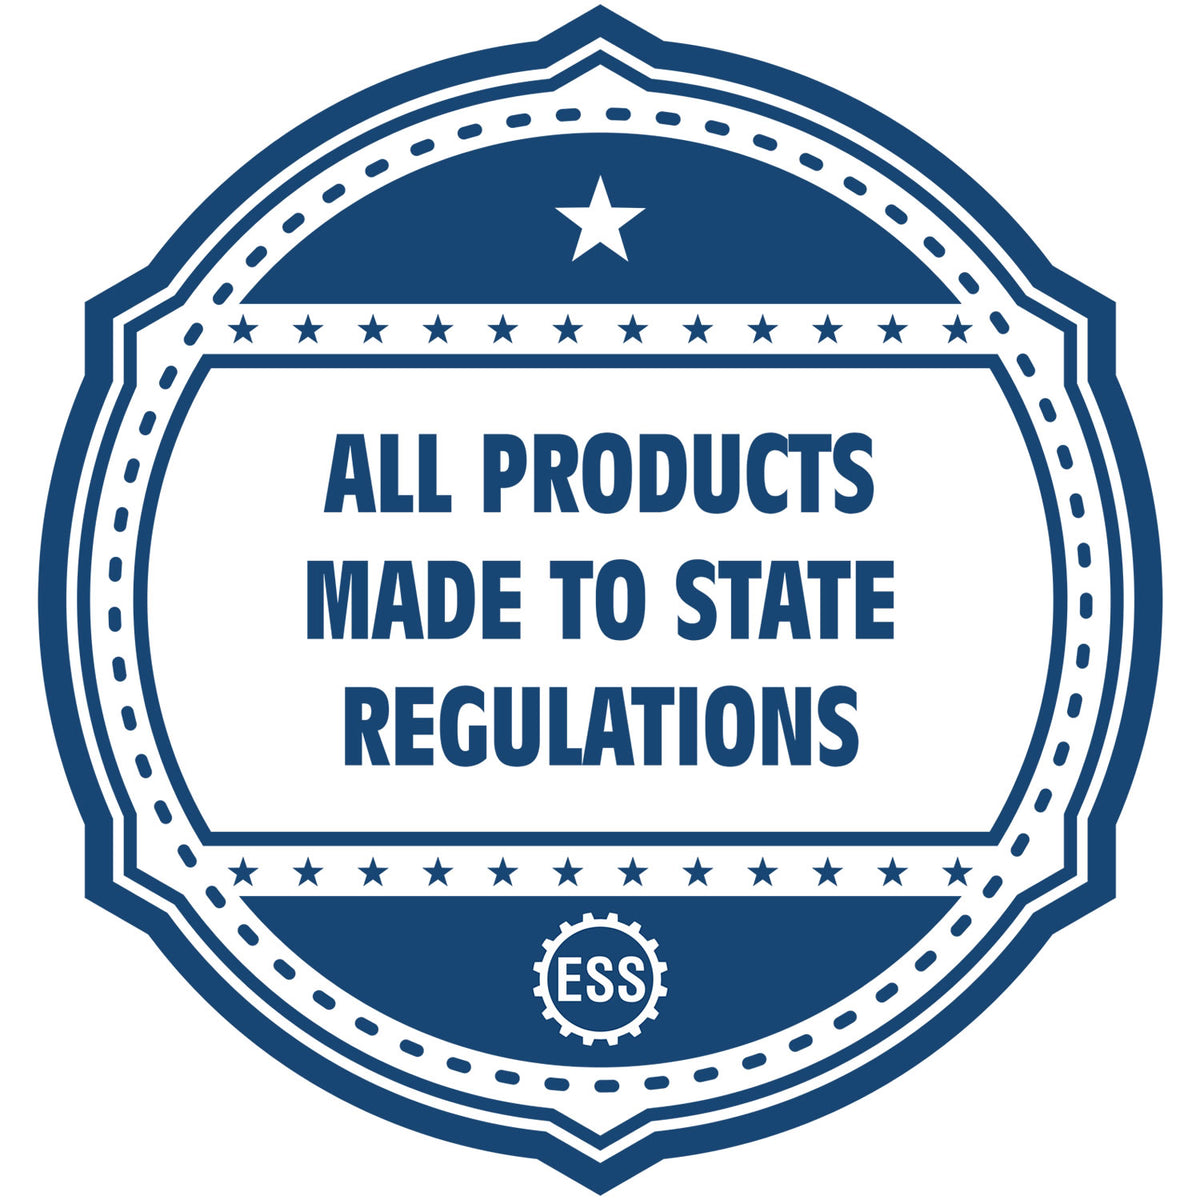 An icon or badge element for the Premium MaxLight Pre-Inked Utah Landscape Architectural Stamp showing that this product is made in compliance with state regulations.